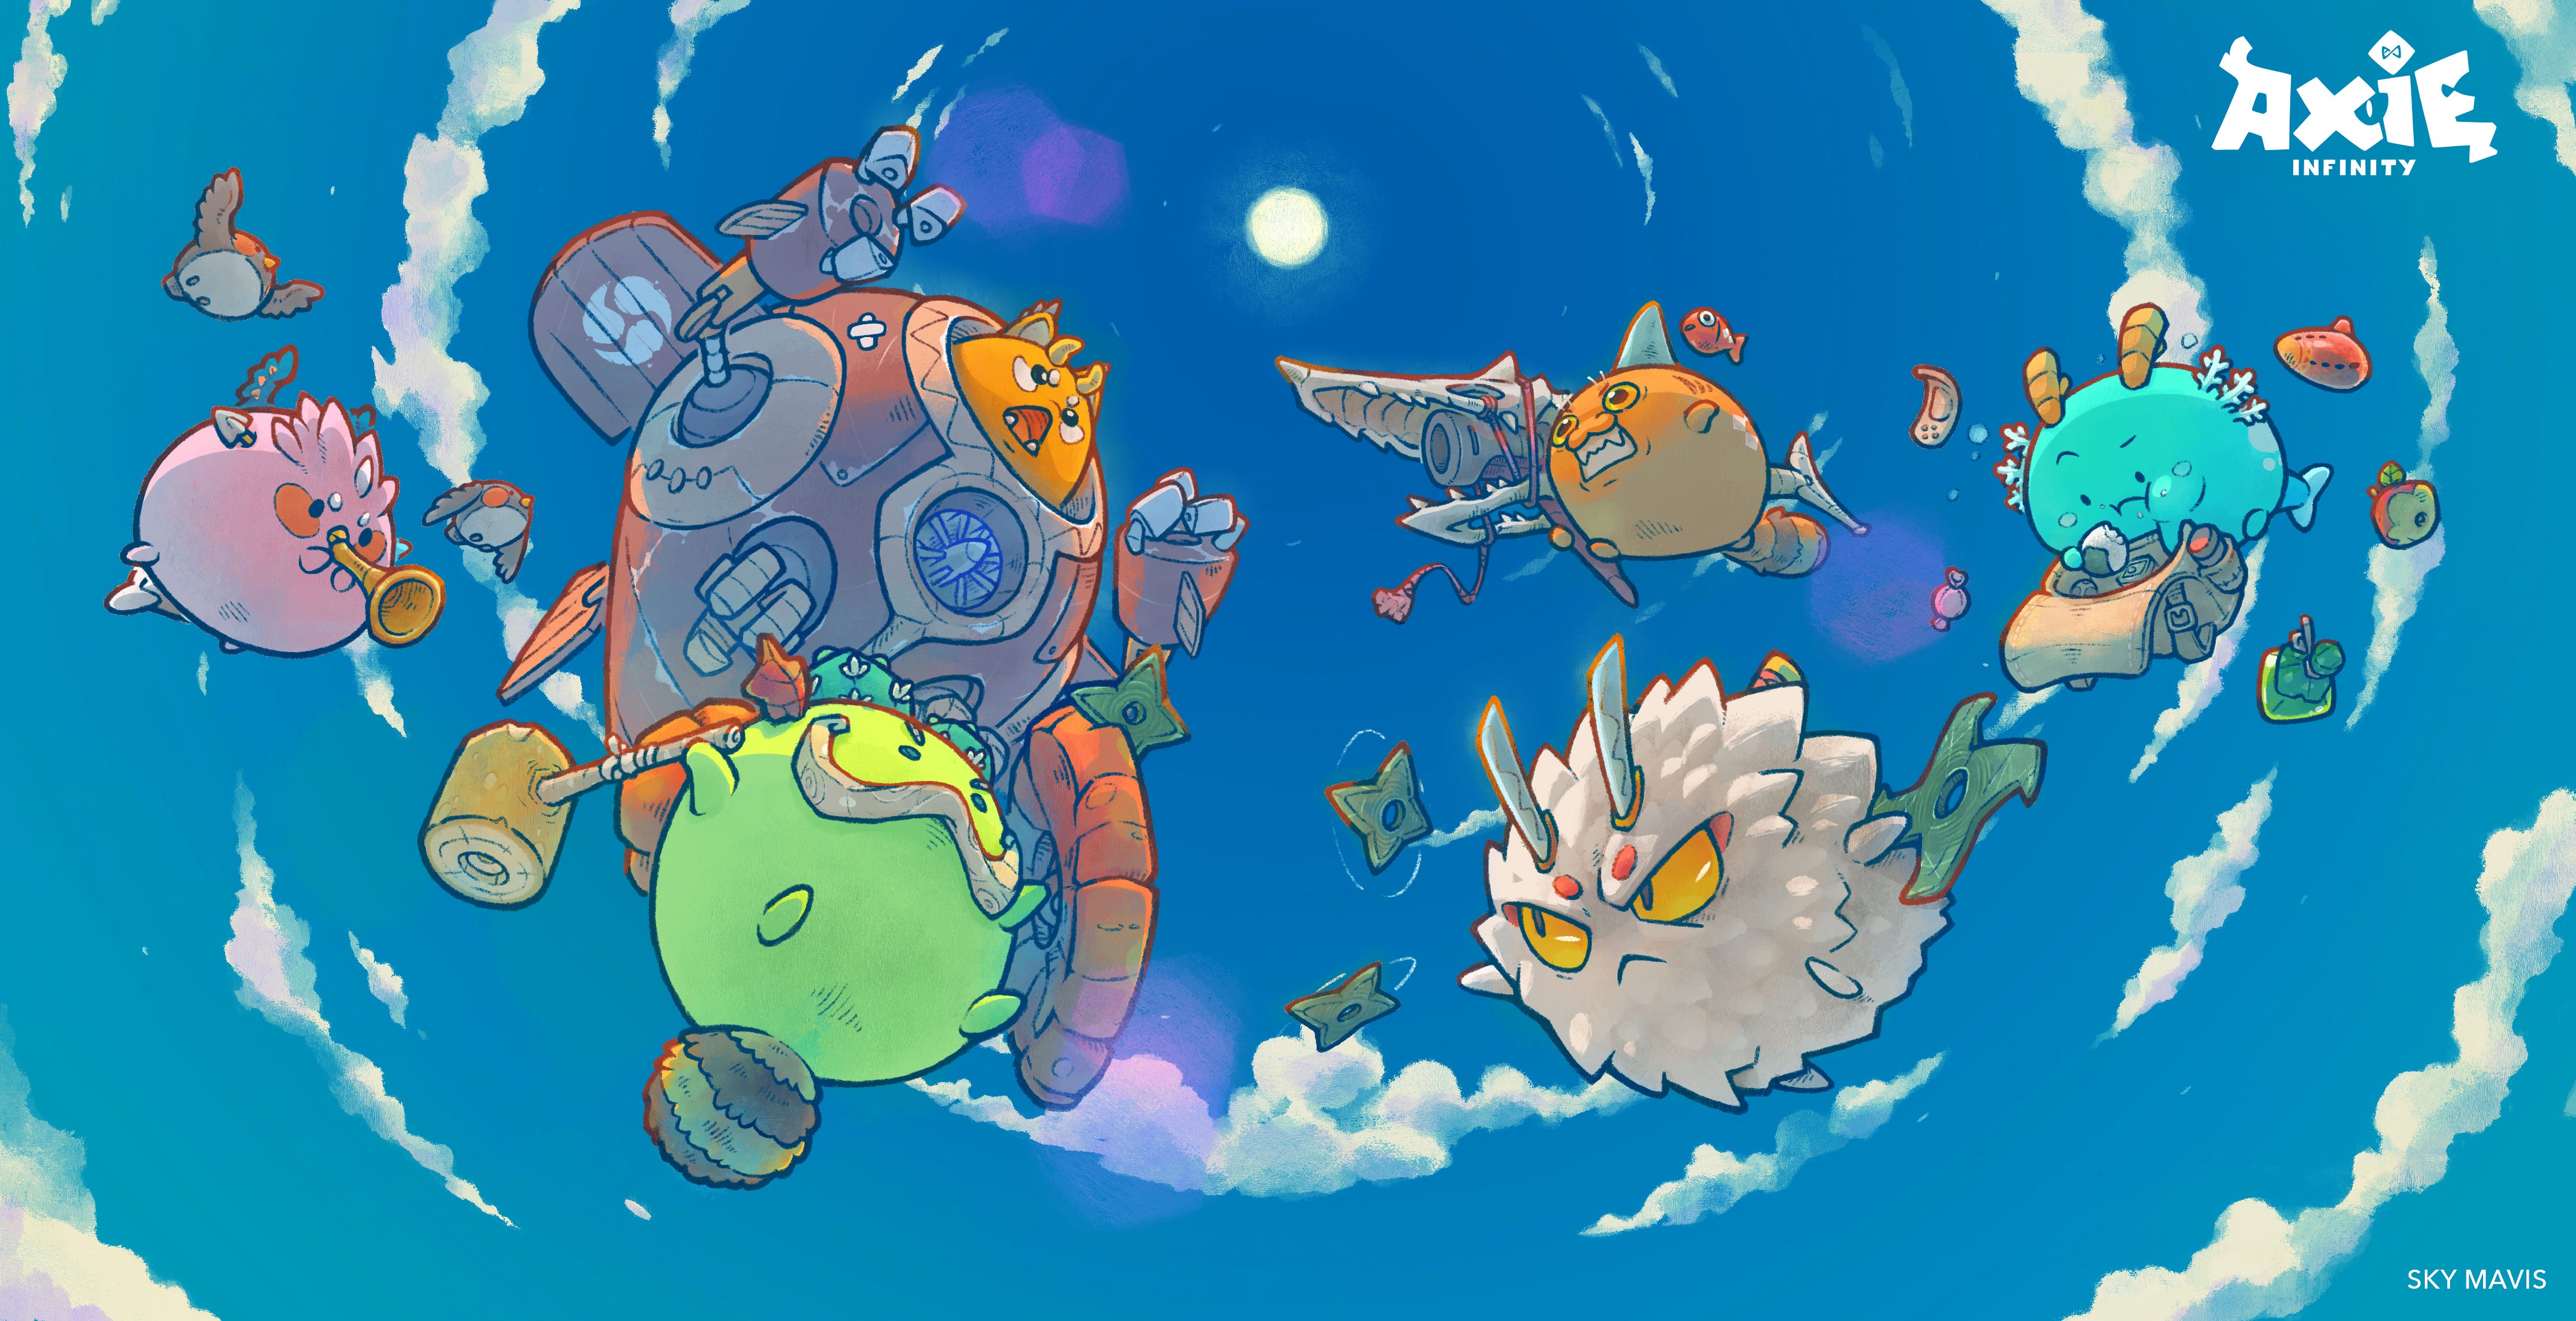 Axie Community Alpha: Getting Started! - The Lunacian